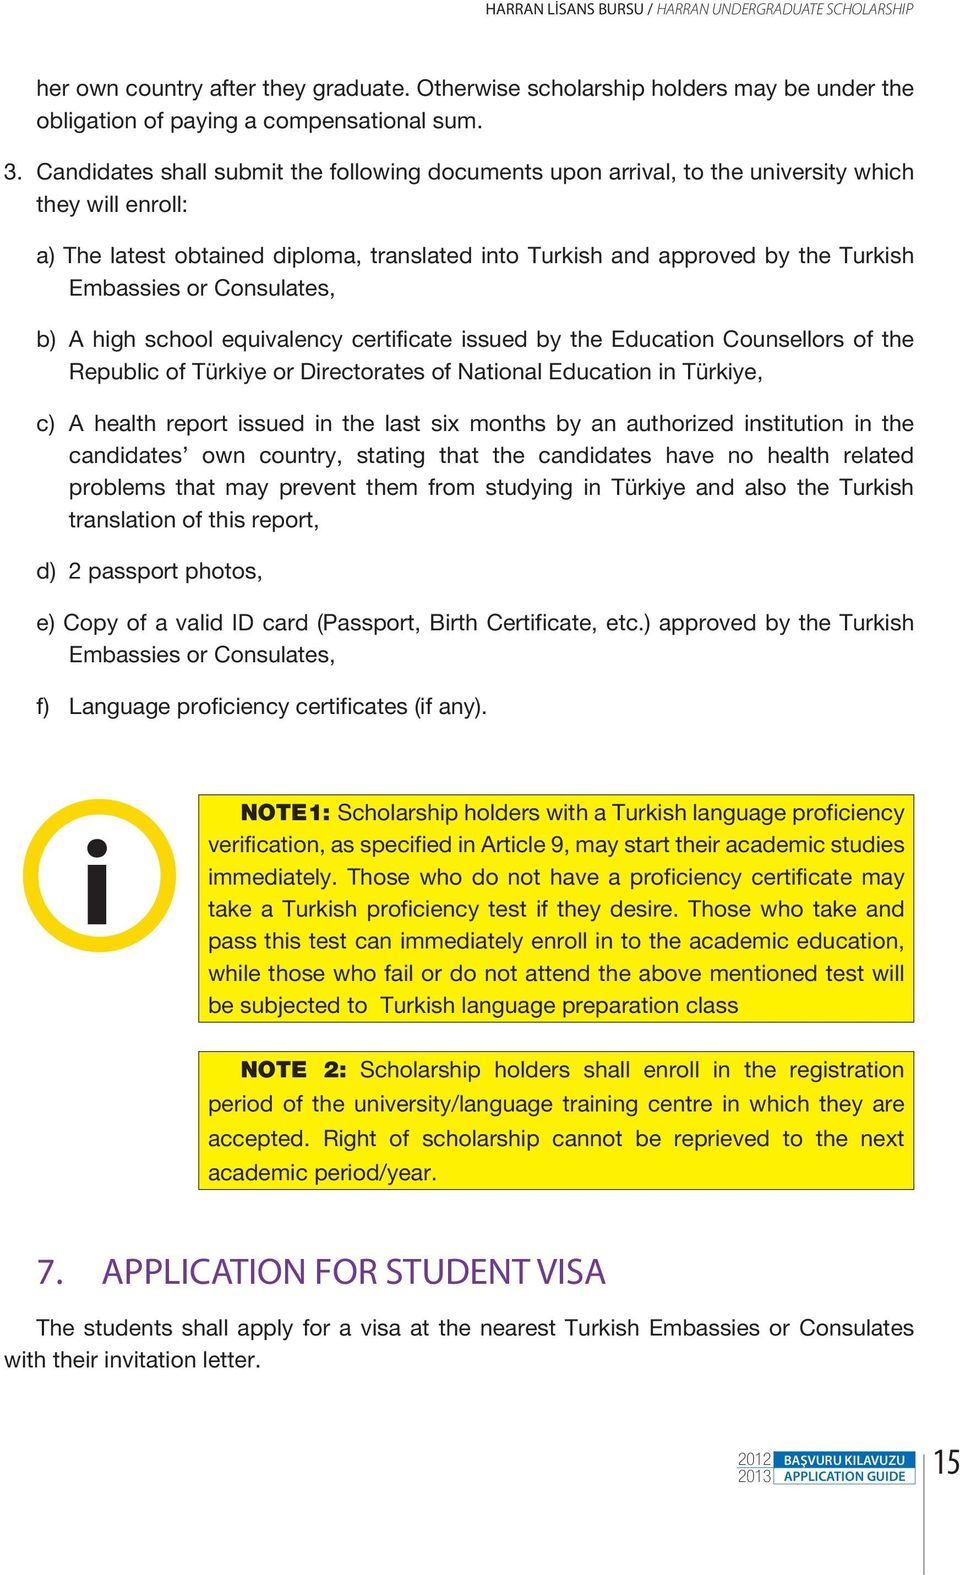 or Consulates, b) A high school equivalency certificate issued by the Education Counsellors of the Republic of Türkiye or Directorates of National Education in Türkiye, c) A health report issued in